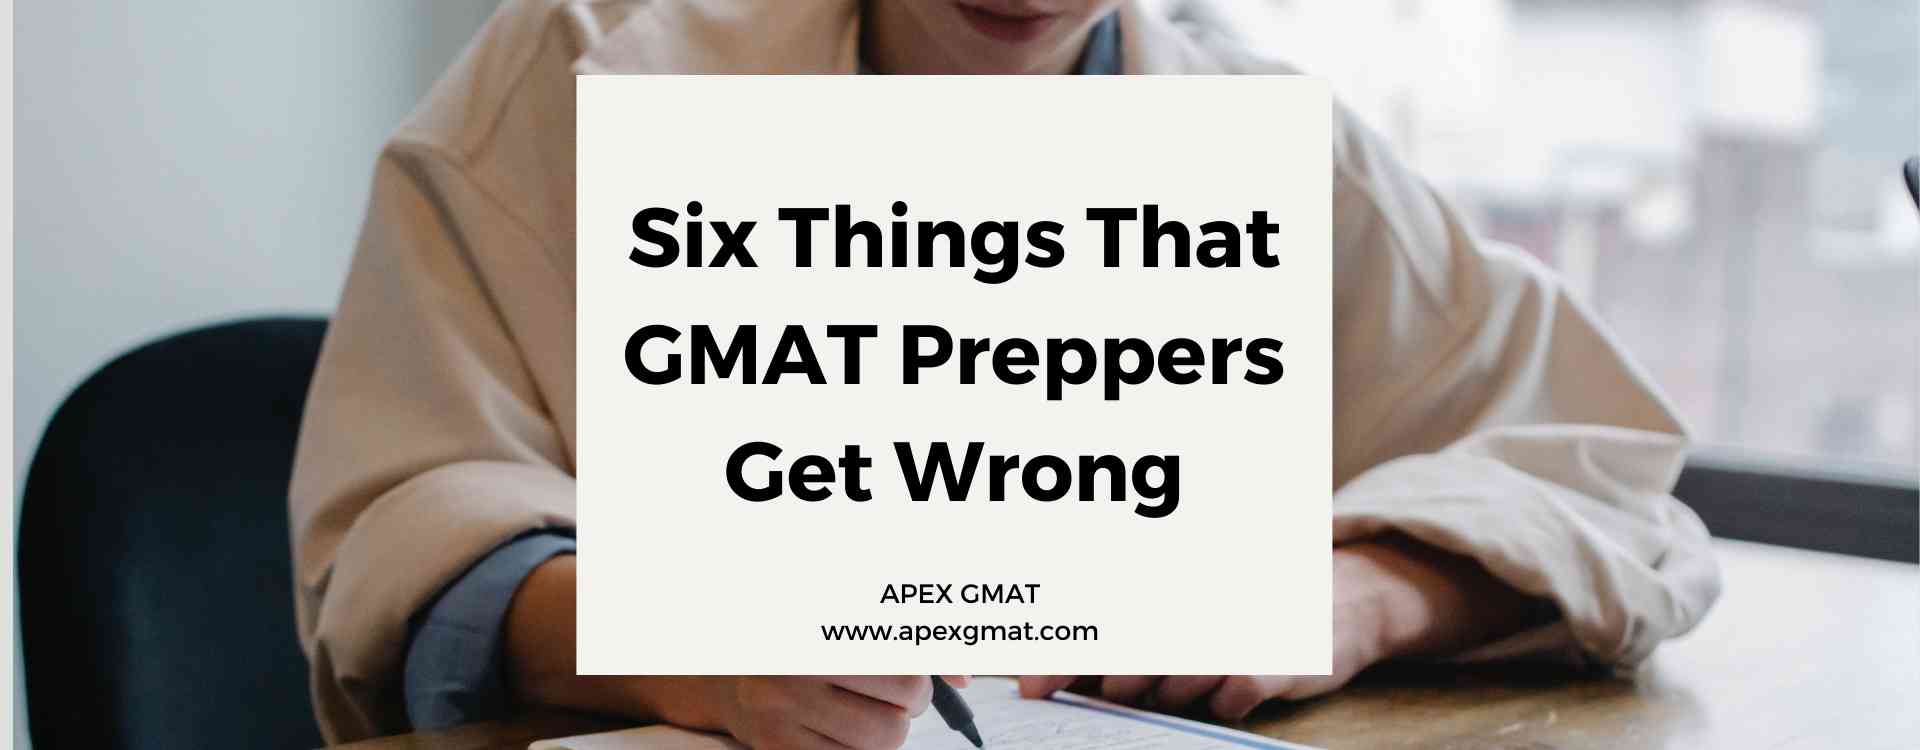 Six Things GMAT Preppers Get Wrong